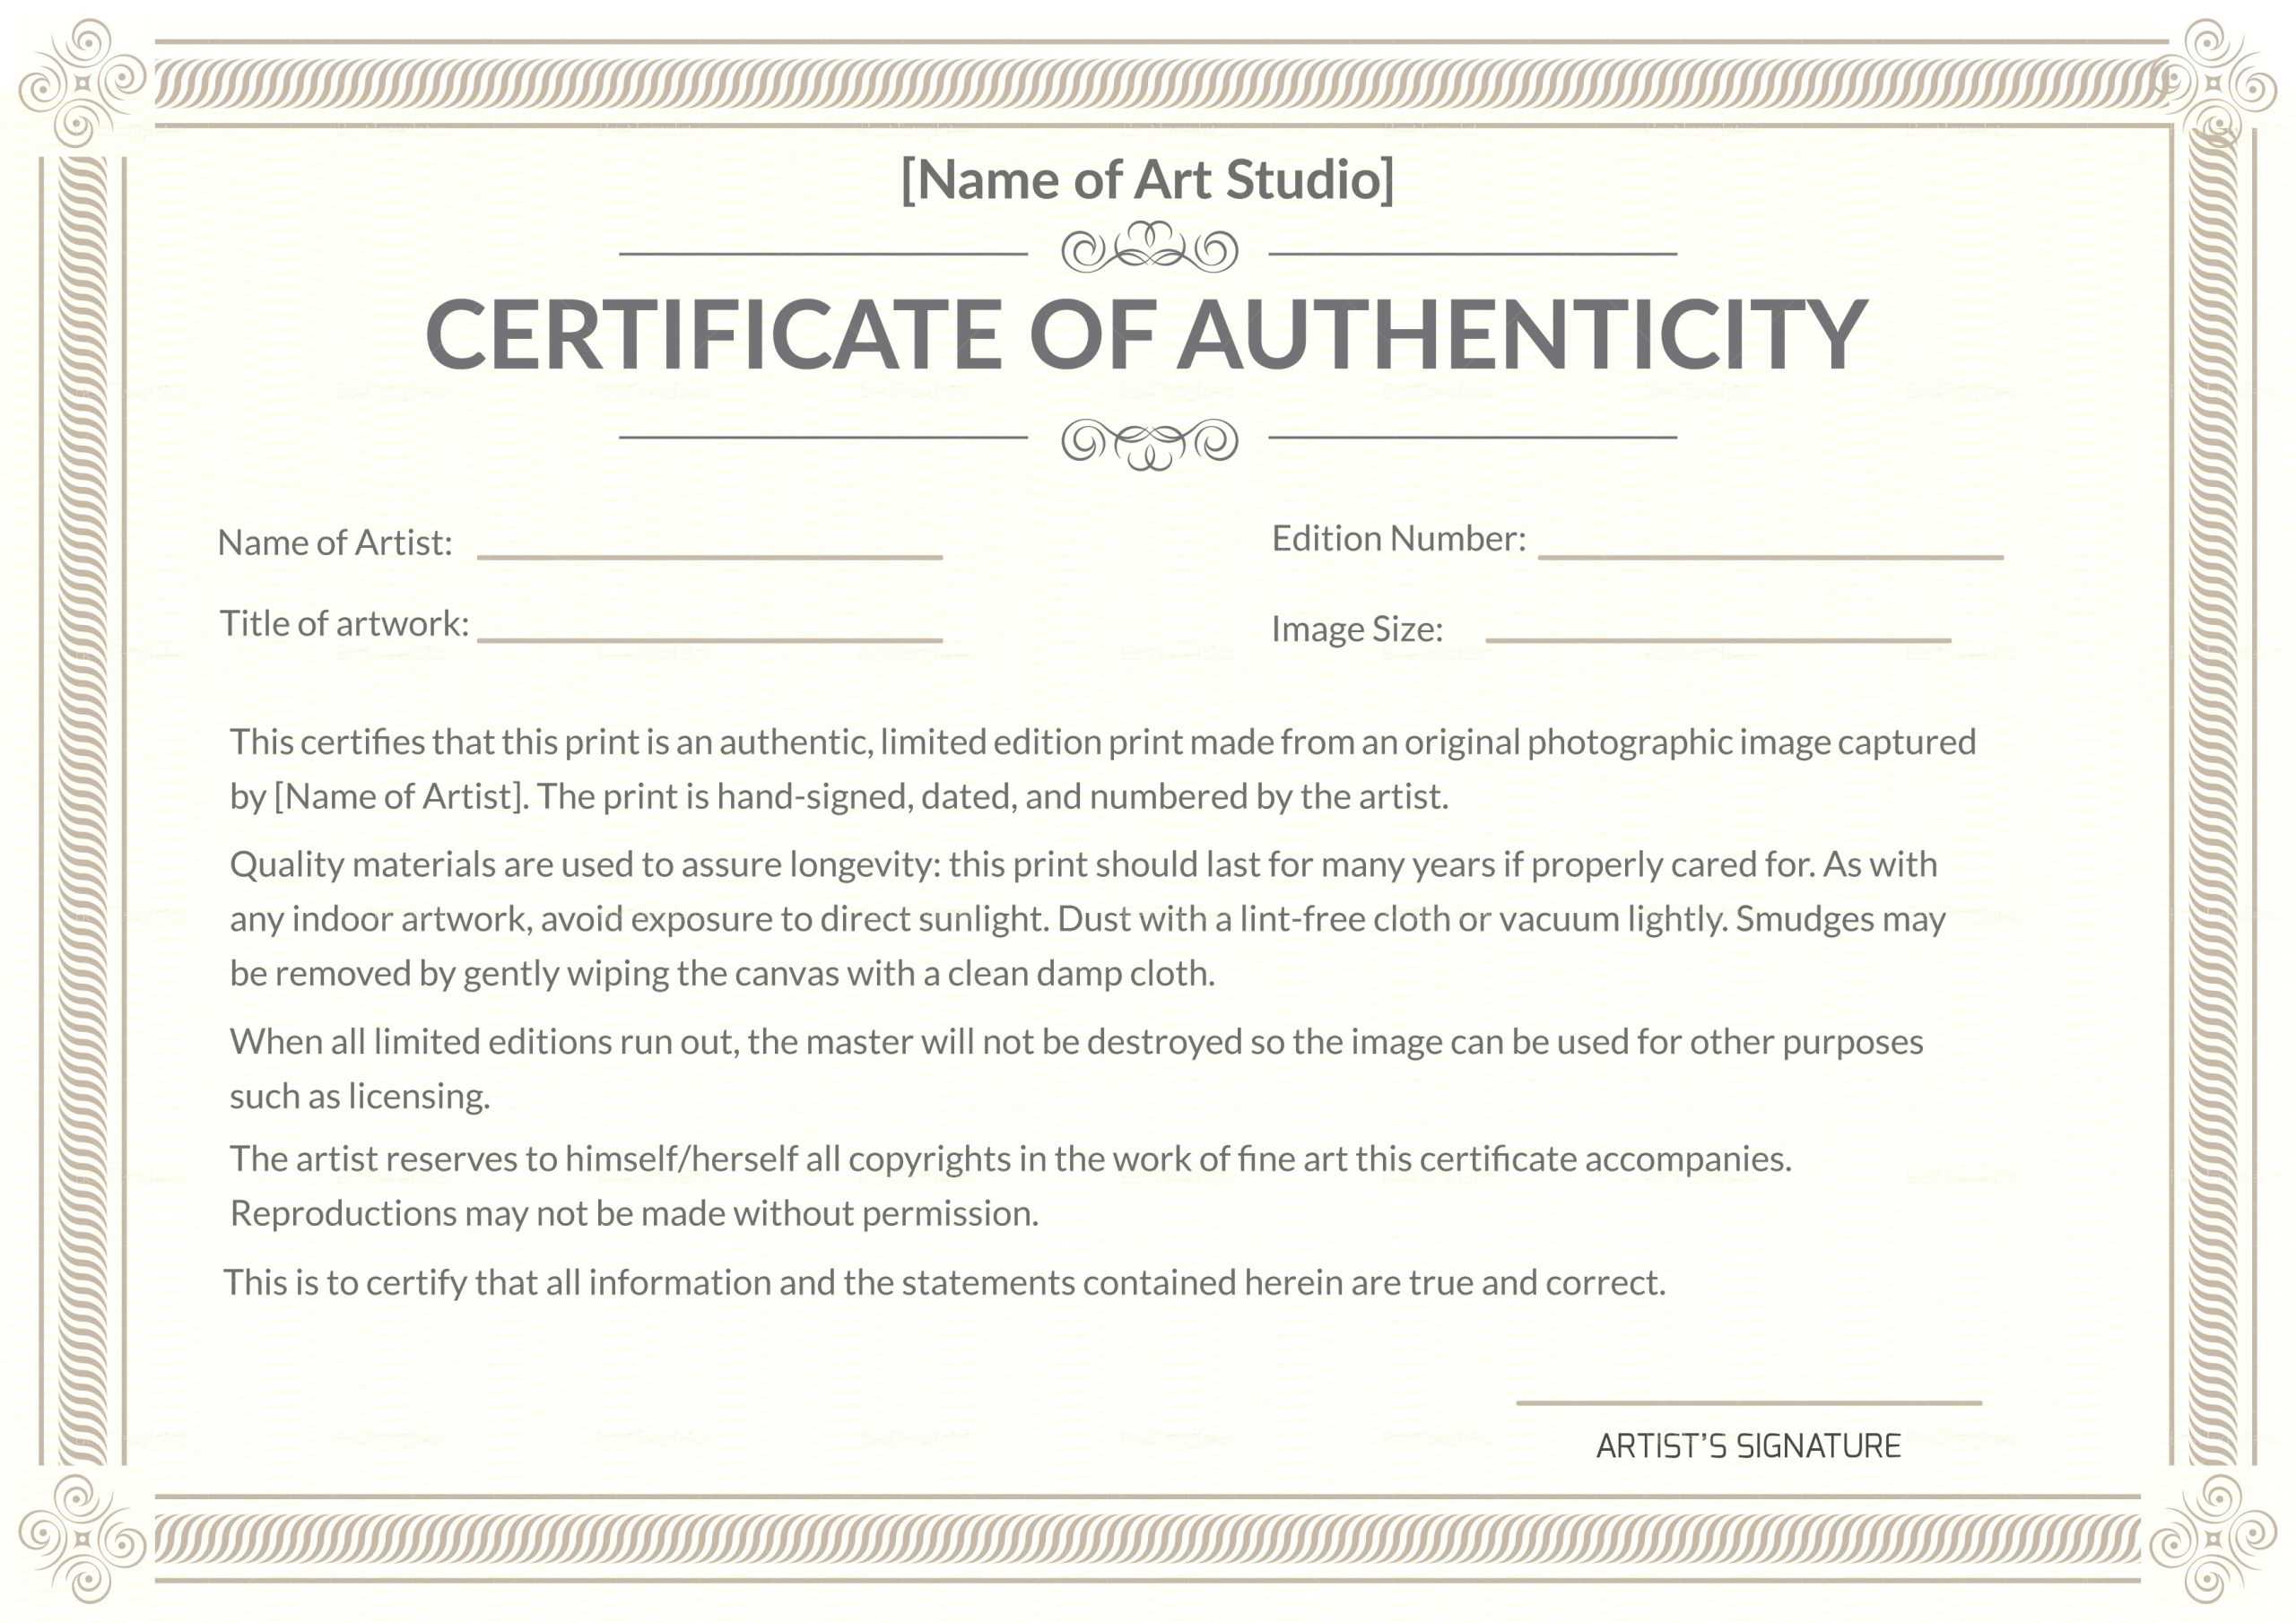 Certificate Of Authenticity Template Certificates Officecom With Regard To Certificate Of Authenticity Photography Template